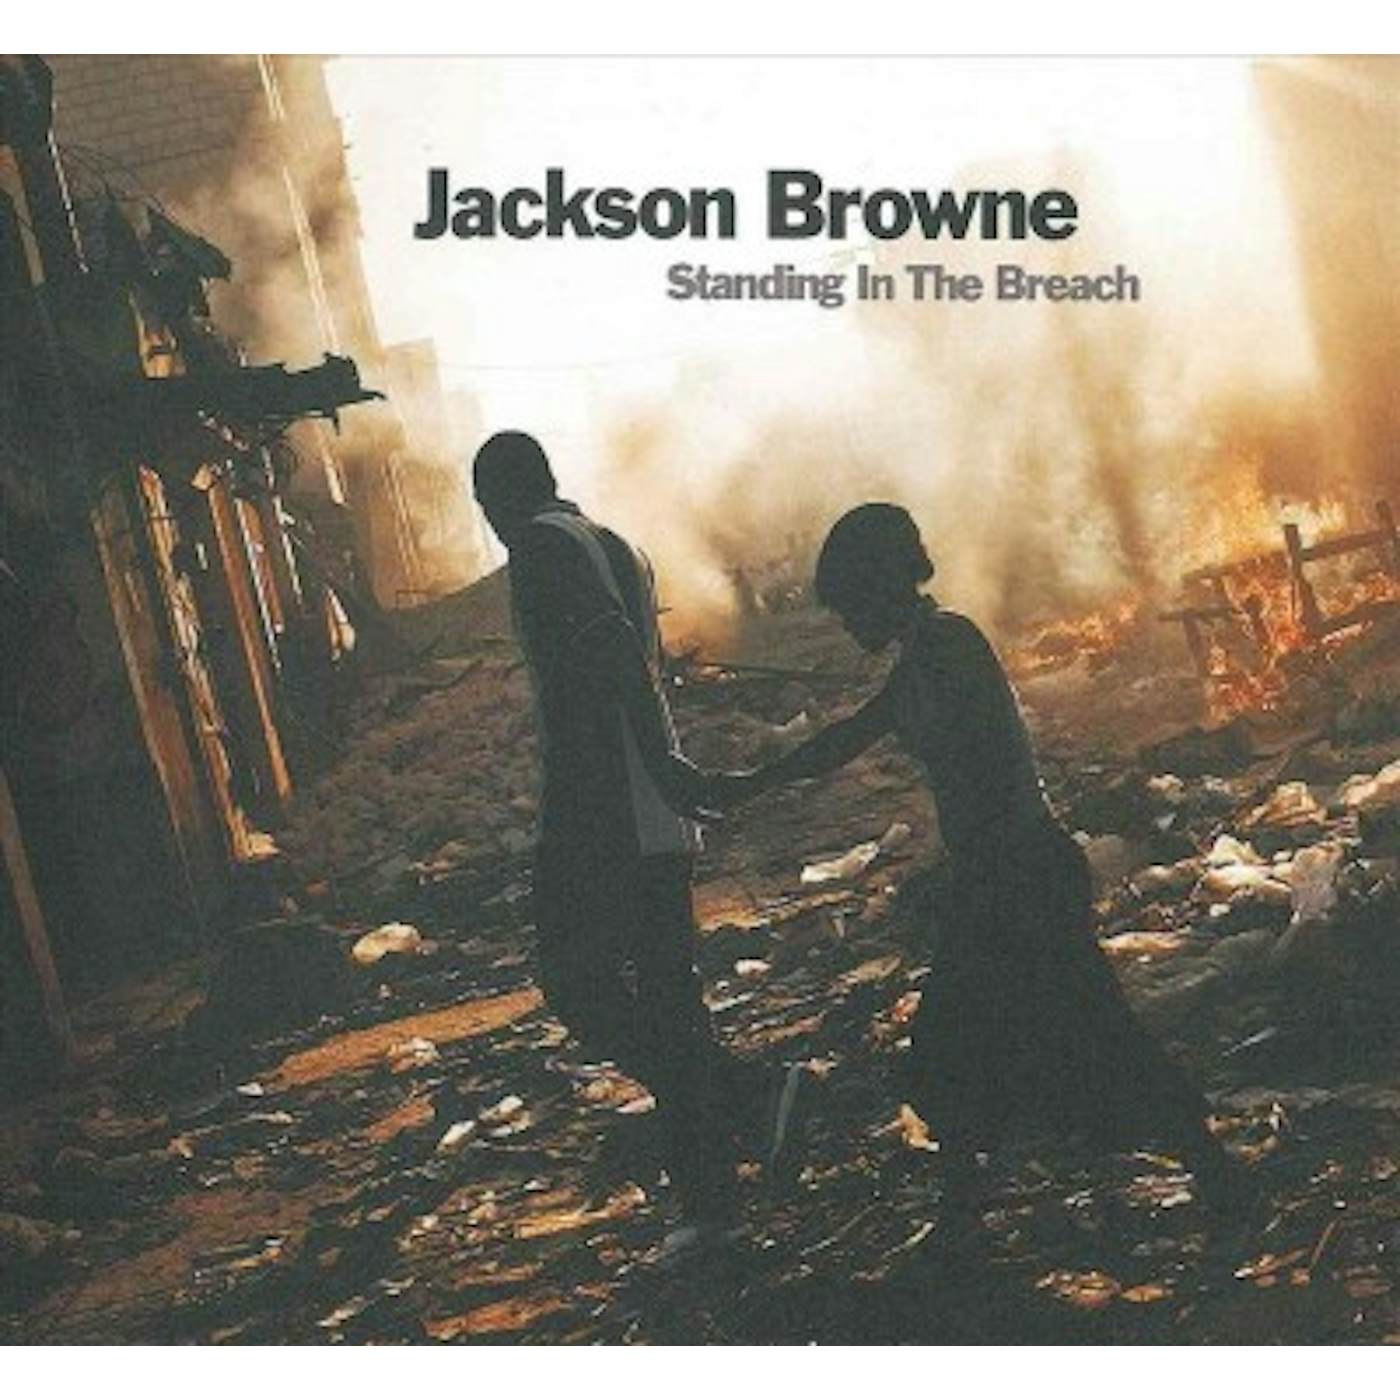 Jackson Browne STANDING IN THE BREACH CD